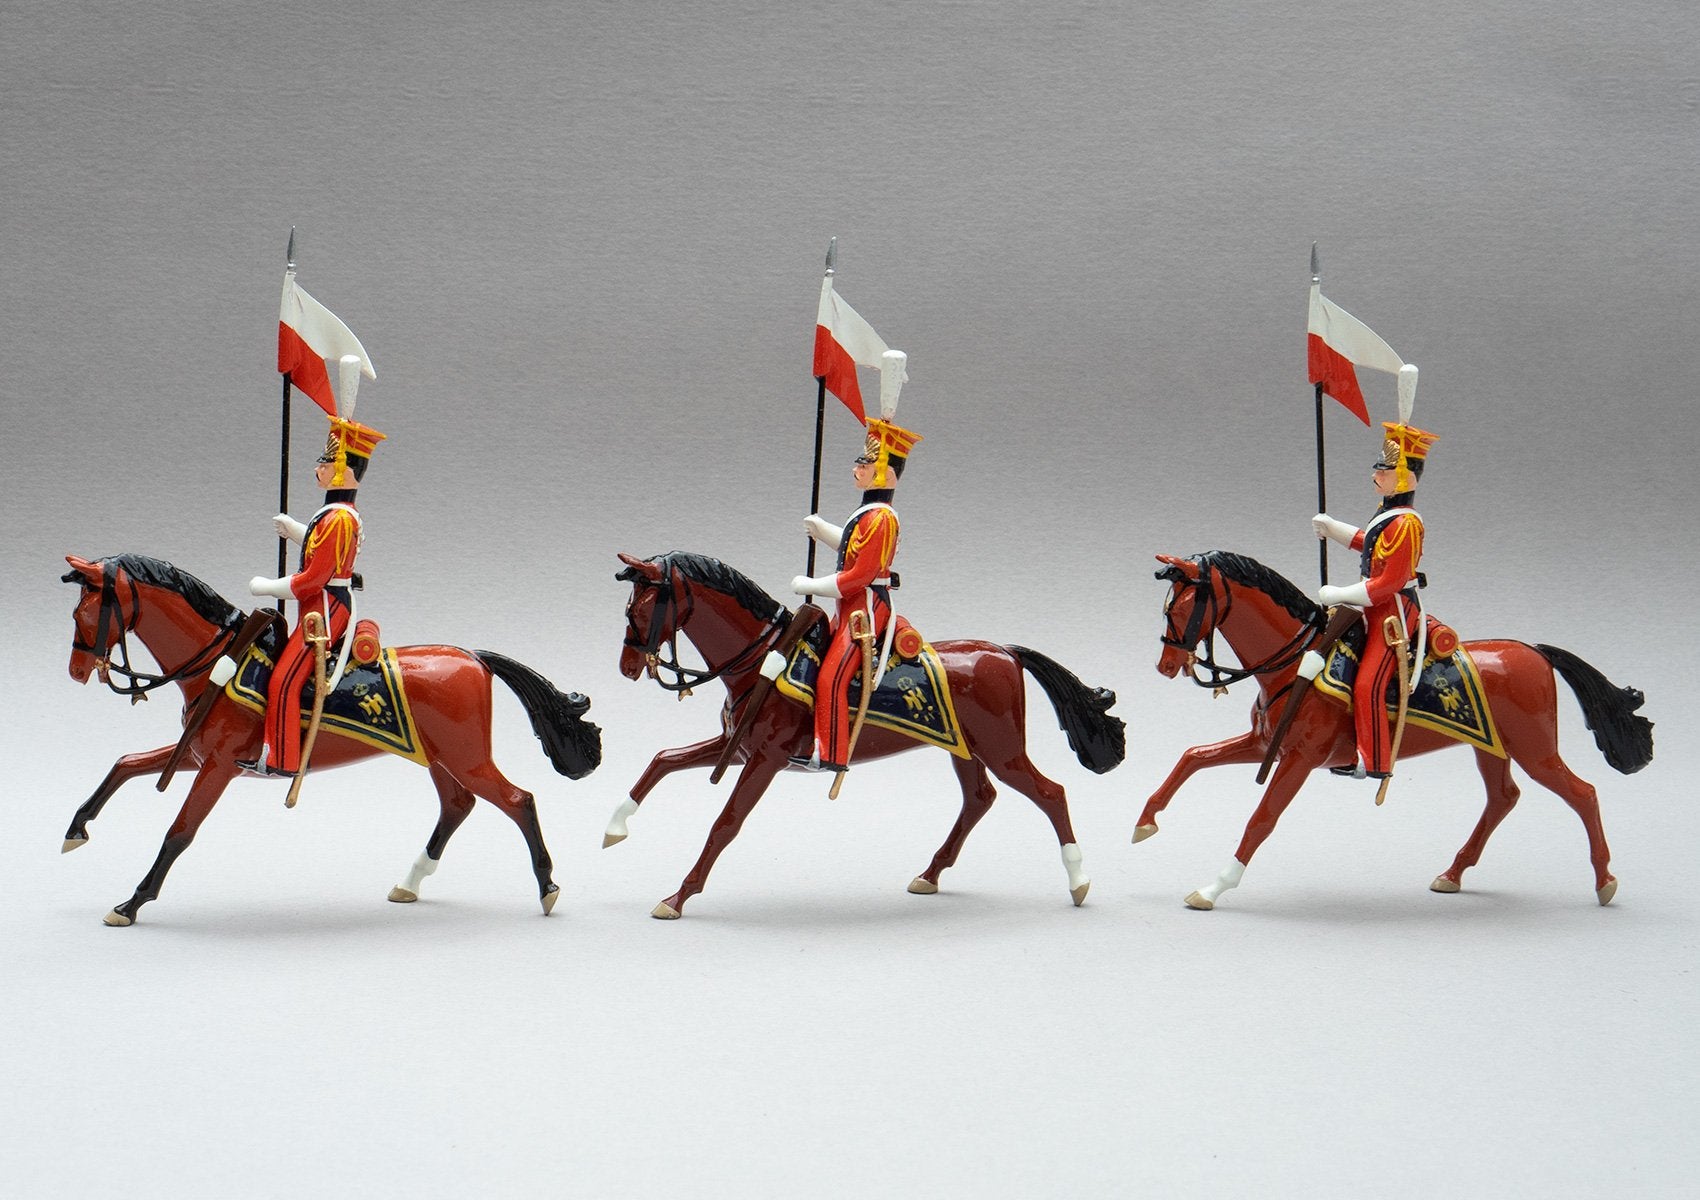 Set 105 Dutch Lancers | Cavalry | Napoleonic Wars | Three Dutch Lancers dressed in orange uniform with lances adorned with red and white pennants | Waterloo | © Imperial Productions | Sculpt by David Cowe